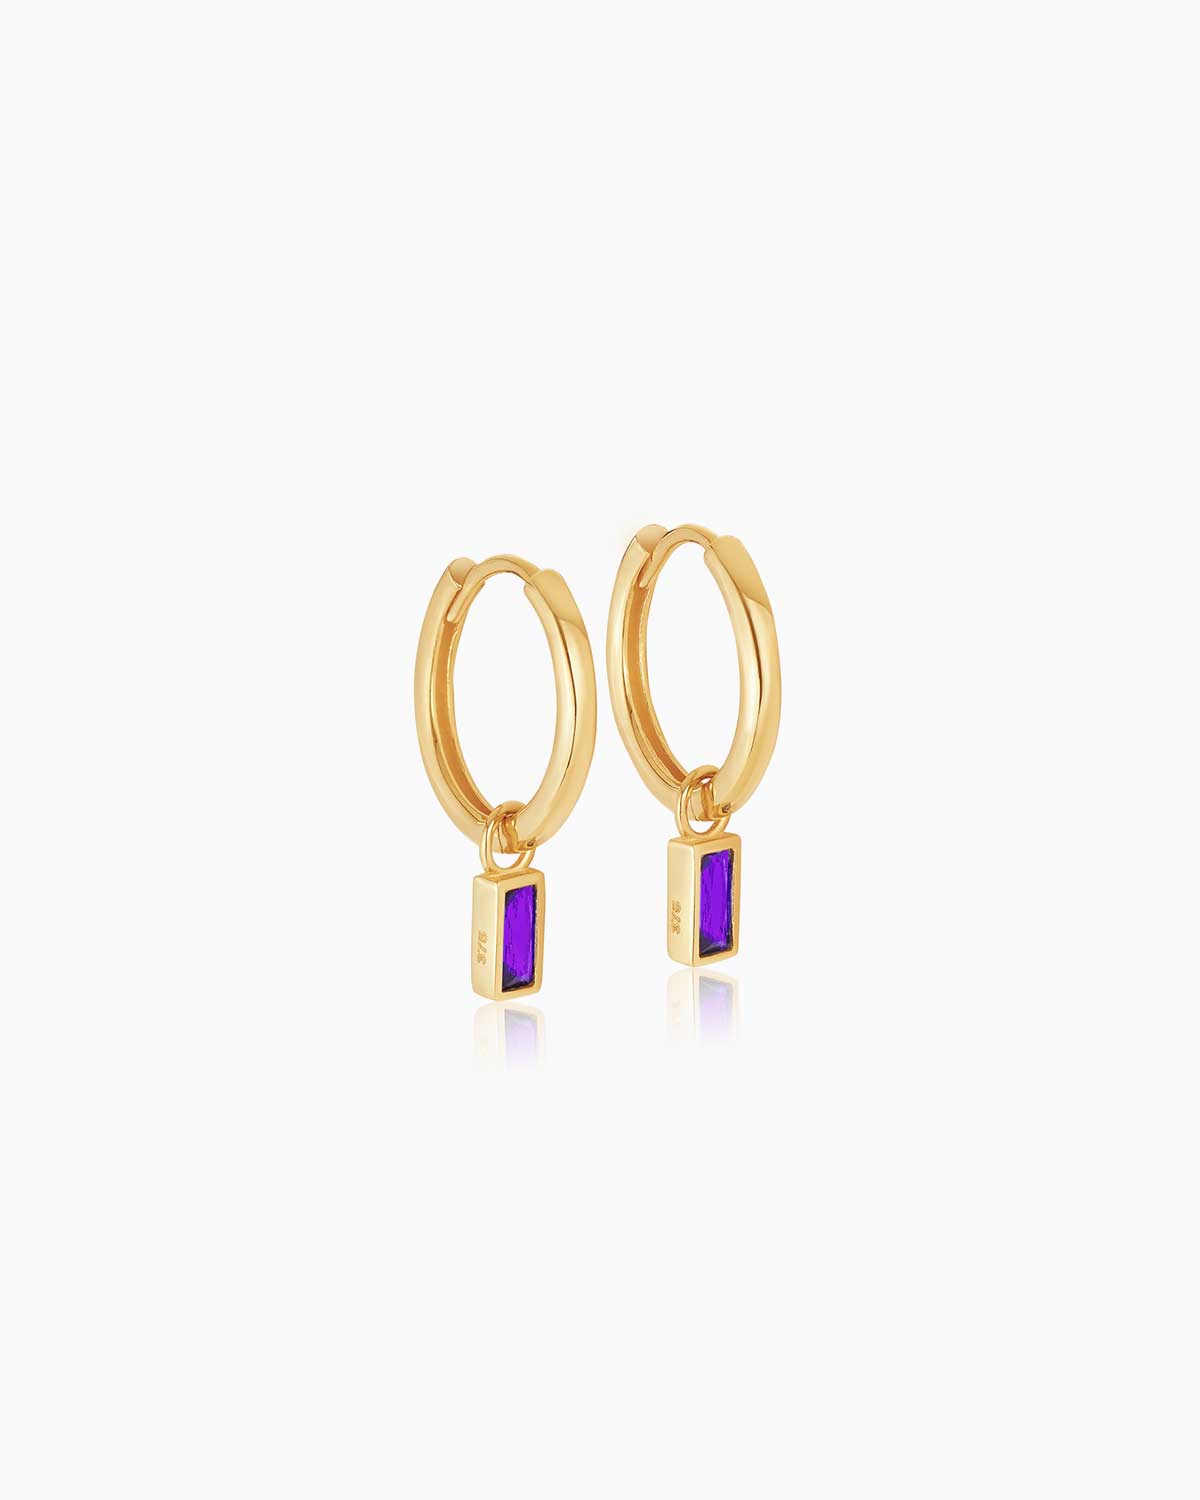 9 karat yellow gold charm hoop earrings with amethyst bezel set drops from the claude by Claudia collection.